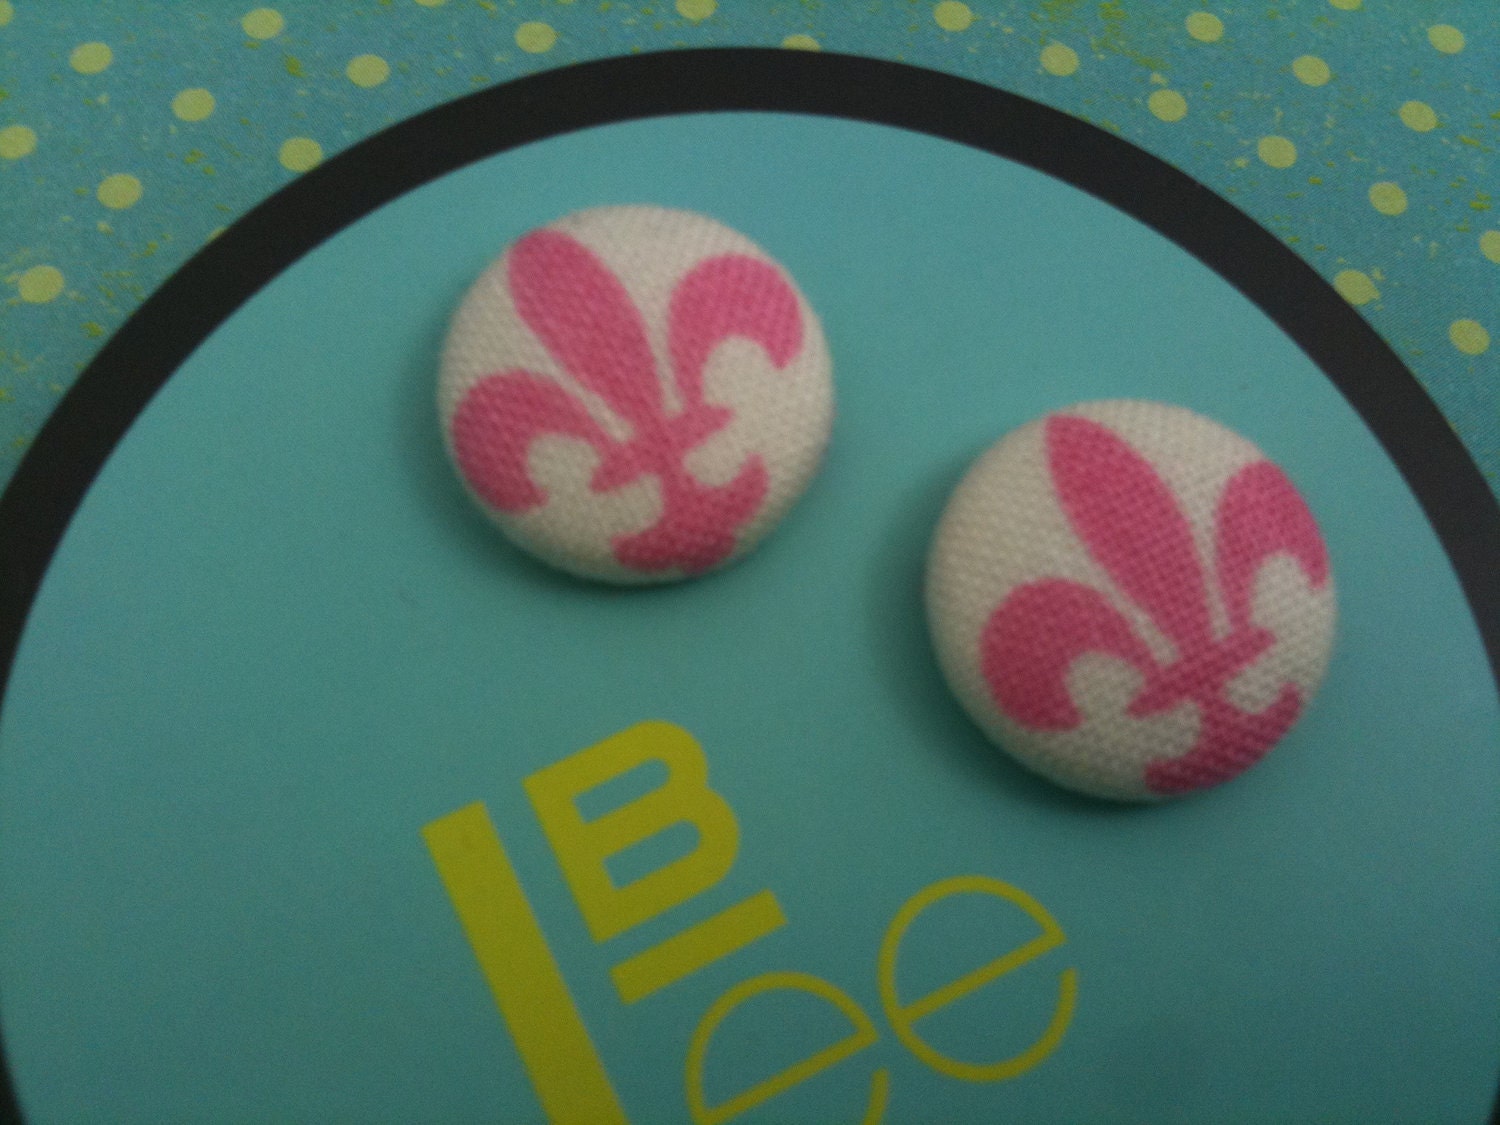 Precious pink and white fleur de lis fabric covered button earrings